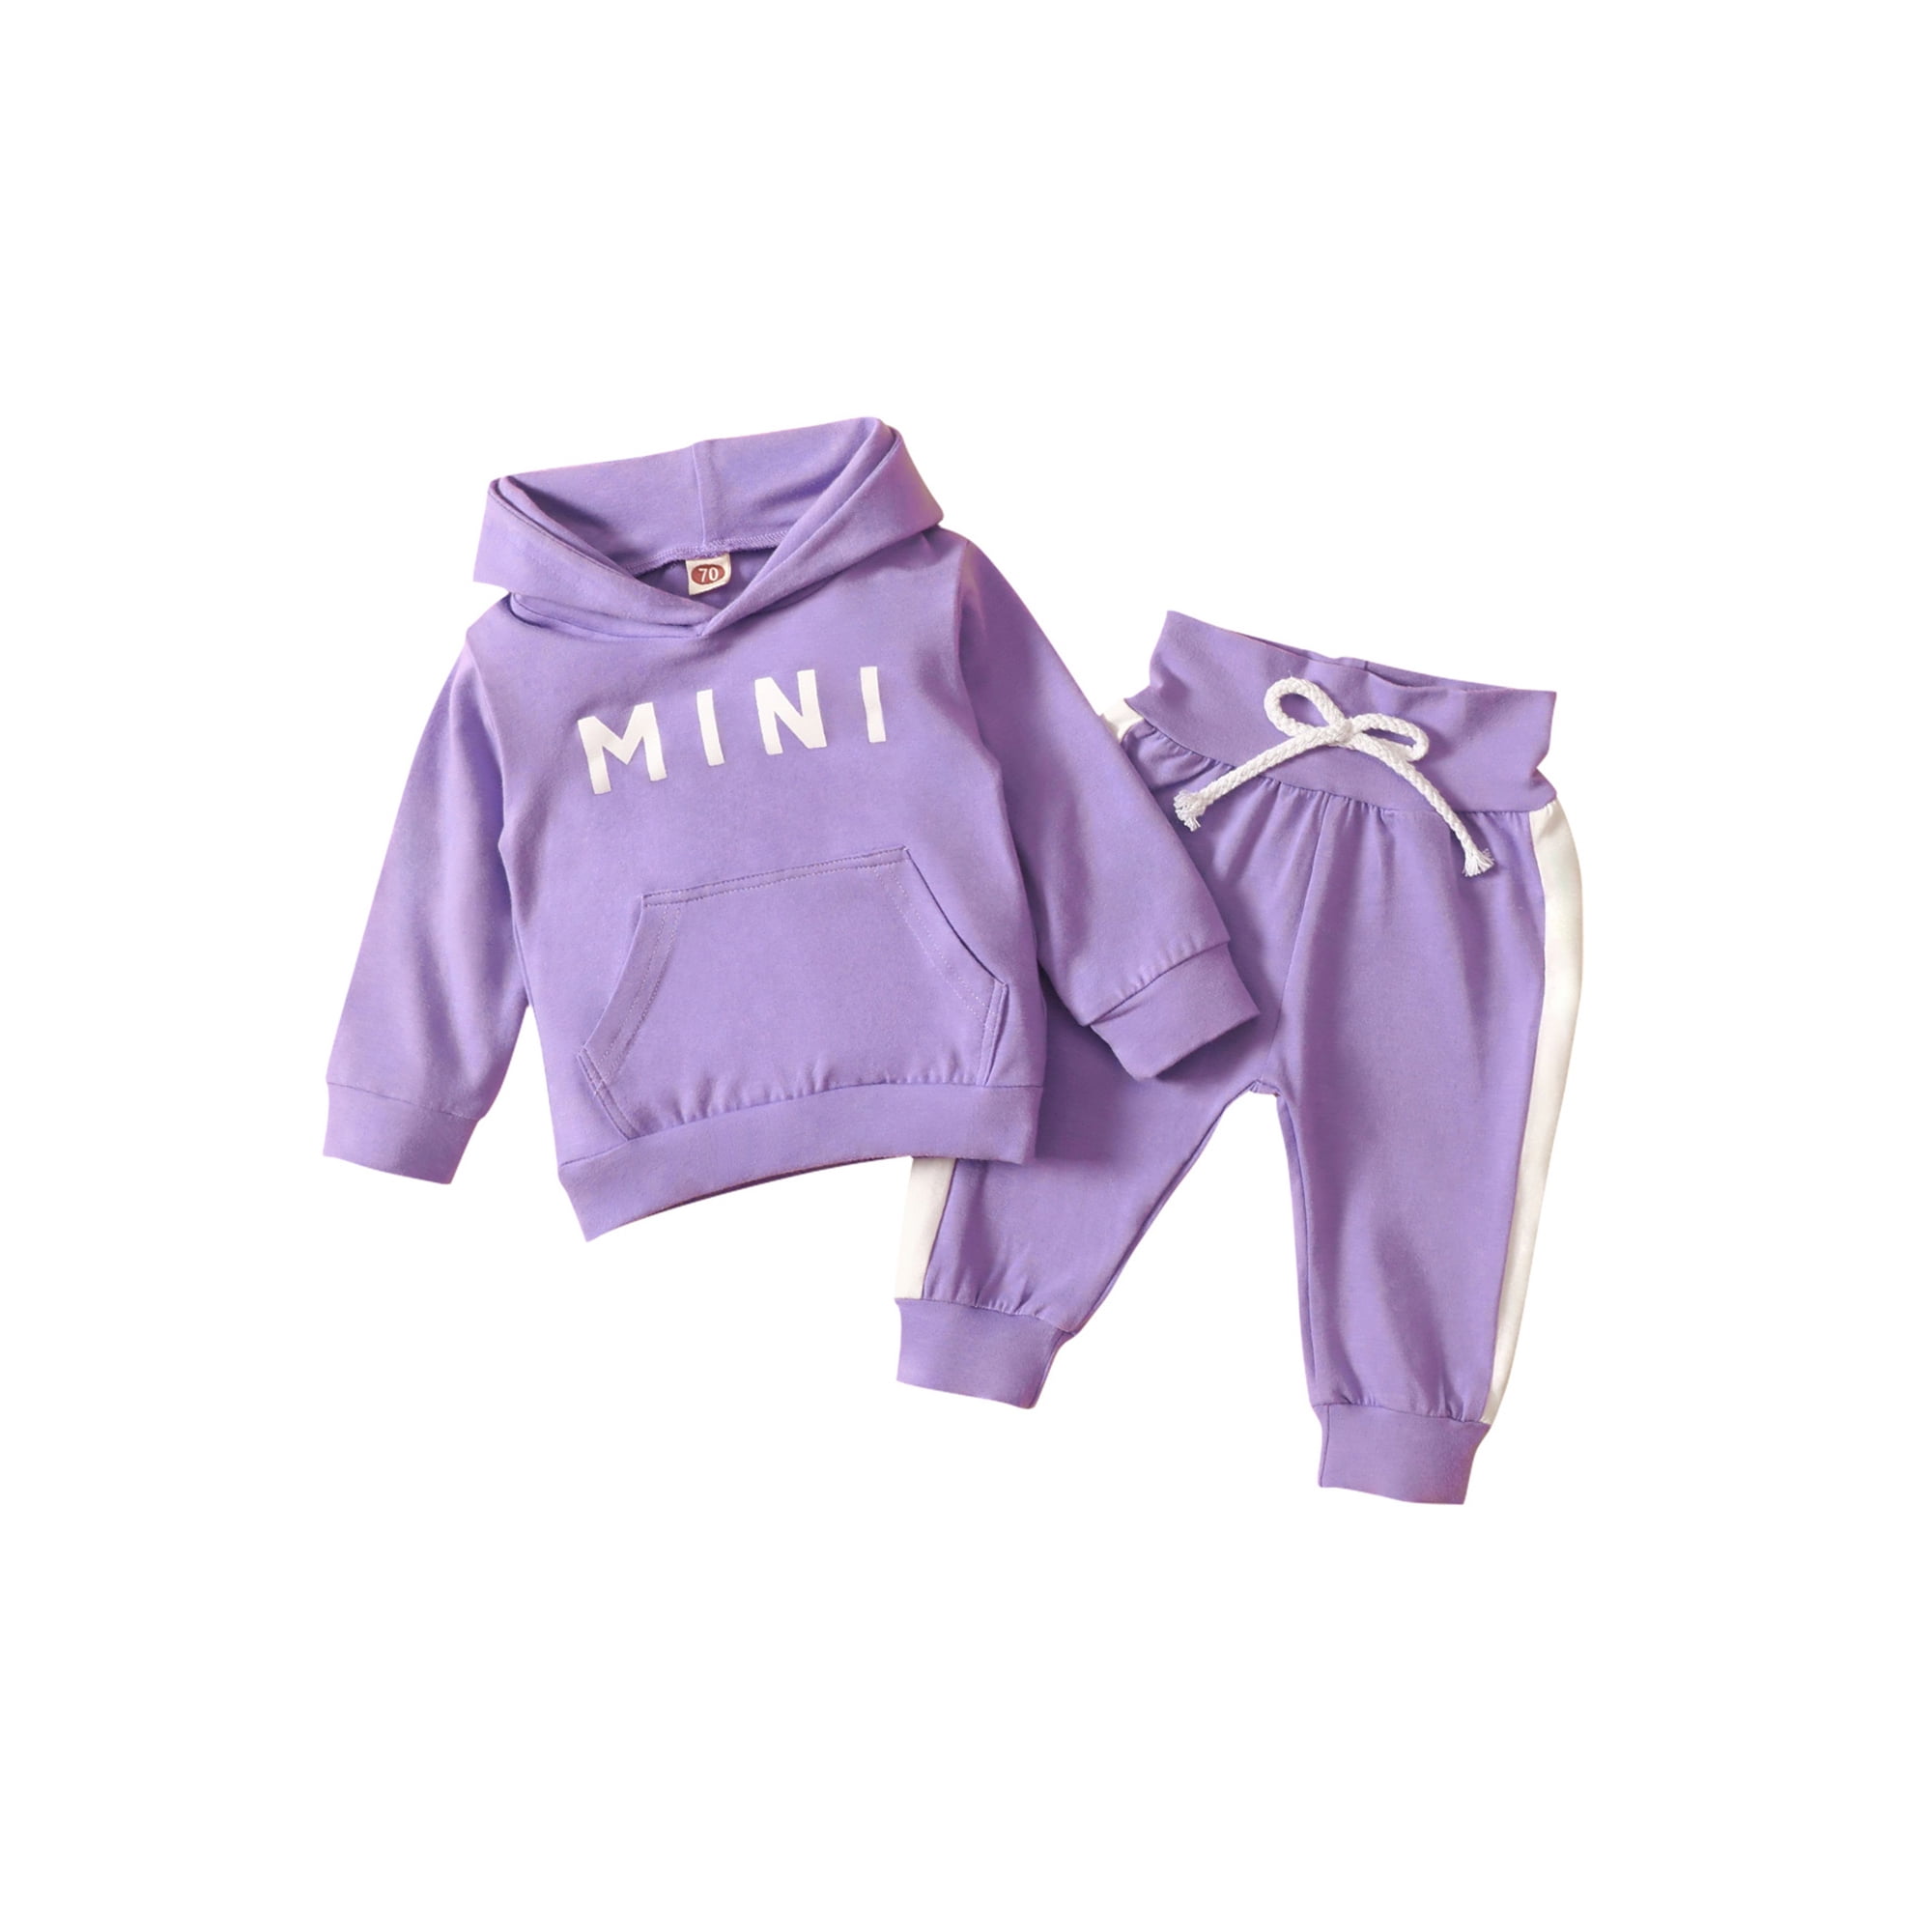 Canrulo Newborn Baby Girl Clothes Mini Hoodie Sweatshirt T-Shirt  Pullover+Pants Fall Winter Outfits Purple 0-6 Months